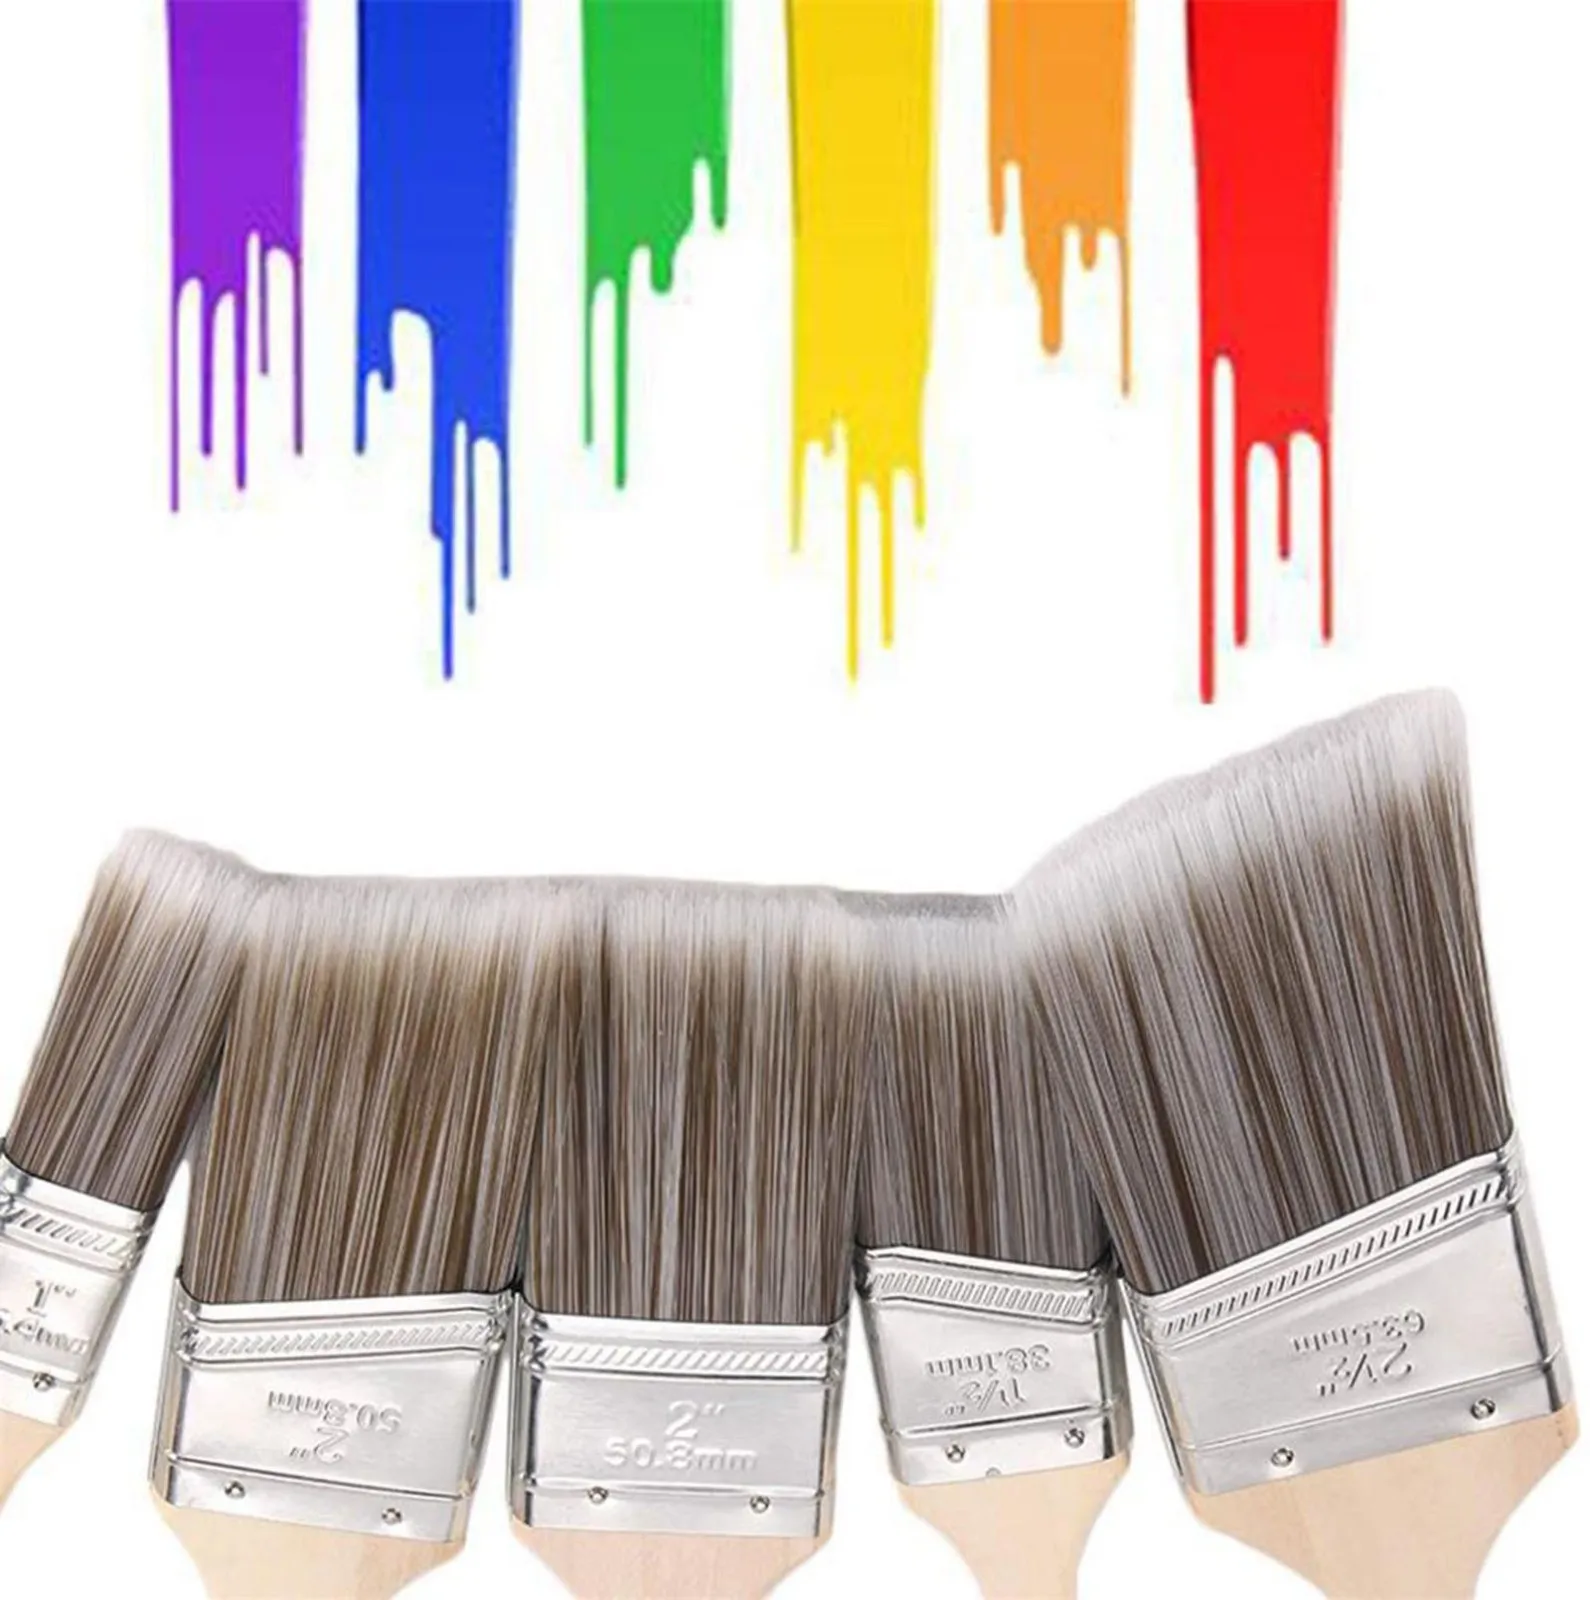 High Quality Nylon Paint Brush Different Size Wooden Handle Watercolor Brushes For Acrylic Oil Painting School Art Supplies small paint brushes